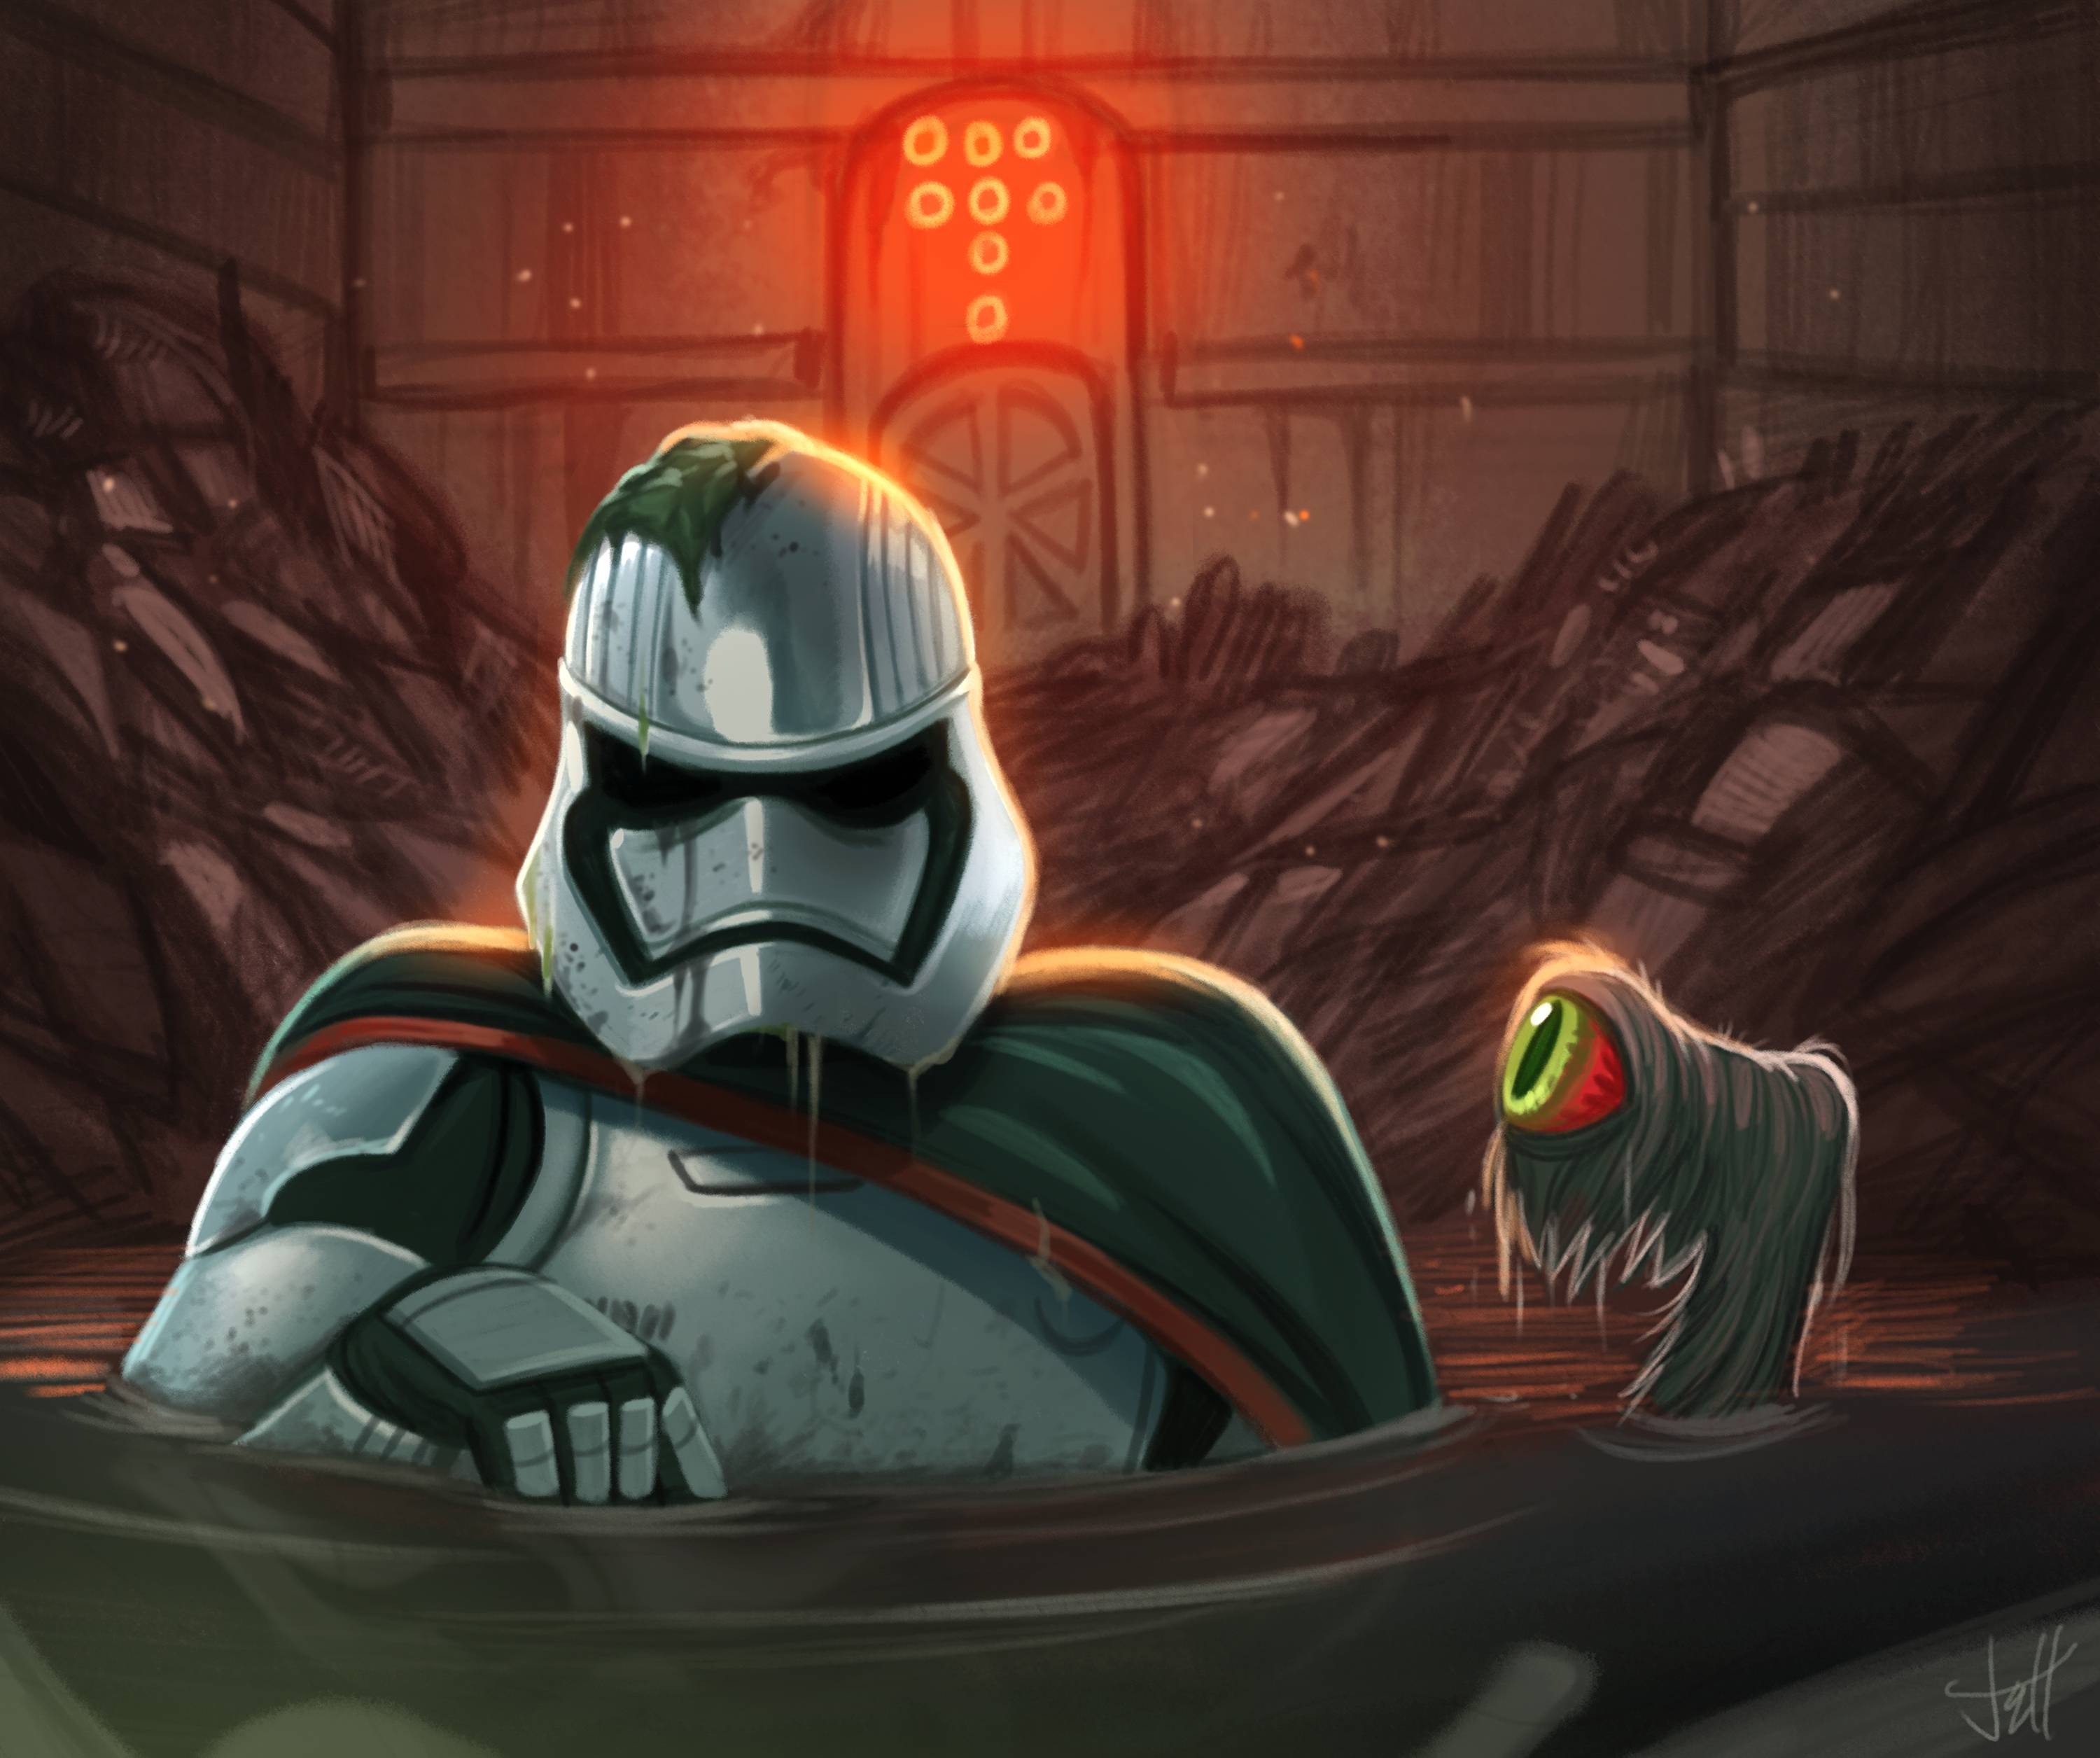 Captain Phasma trapped in the trash compactor Full HD Wallpaper